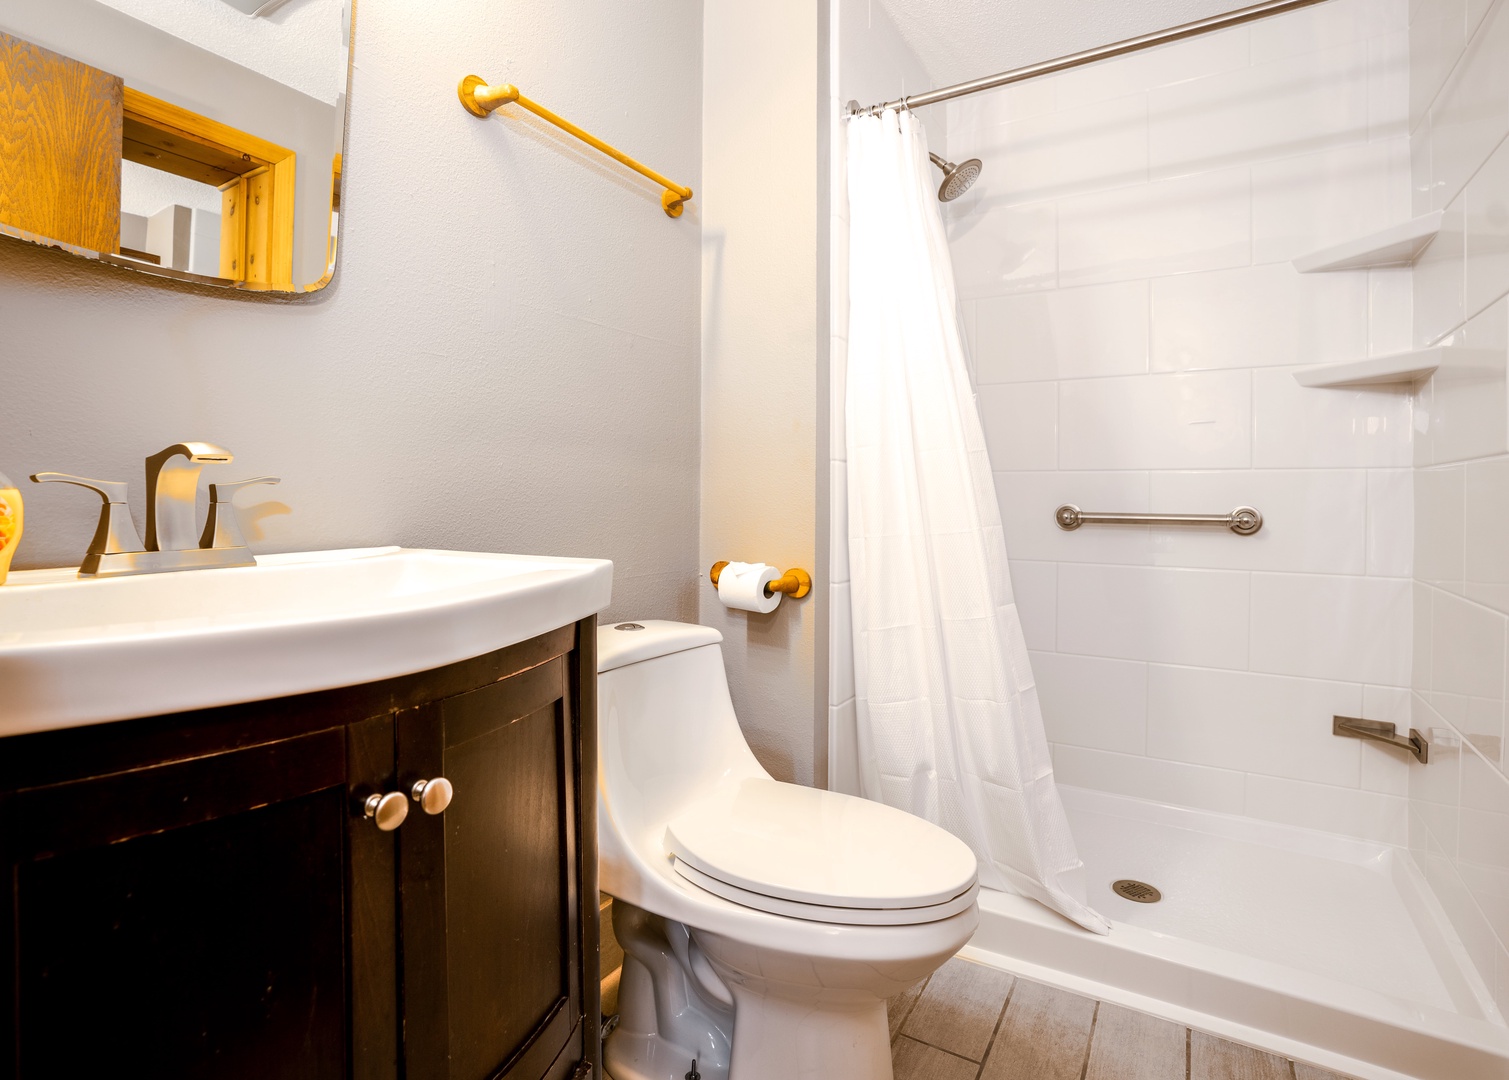 The primary suite contains a single vanity and walk in shower